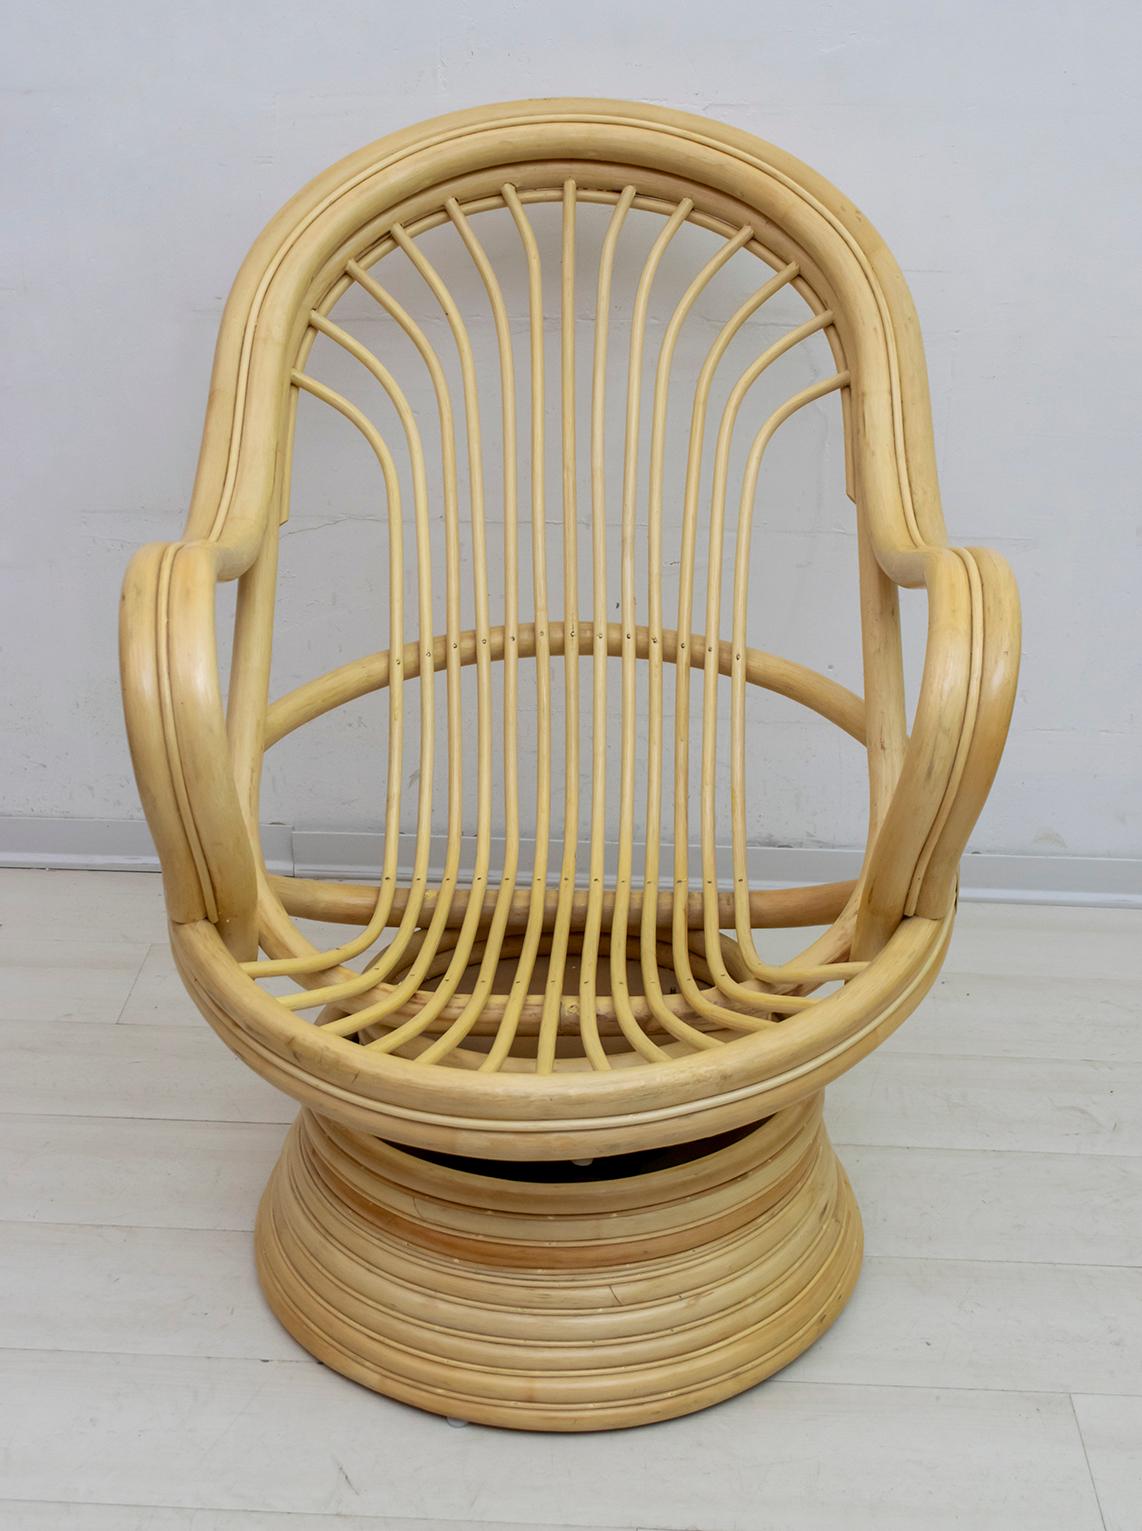 Exclusive wicker and bamboo swivel rocking chair. It has a round seat with a rocking mechanism.